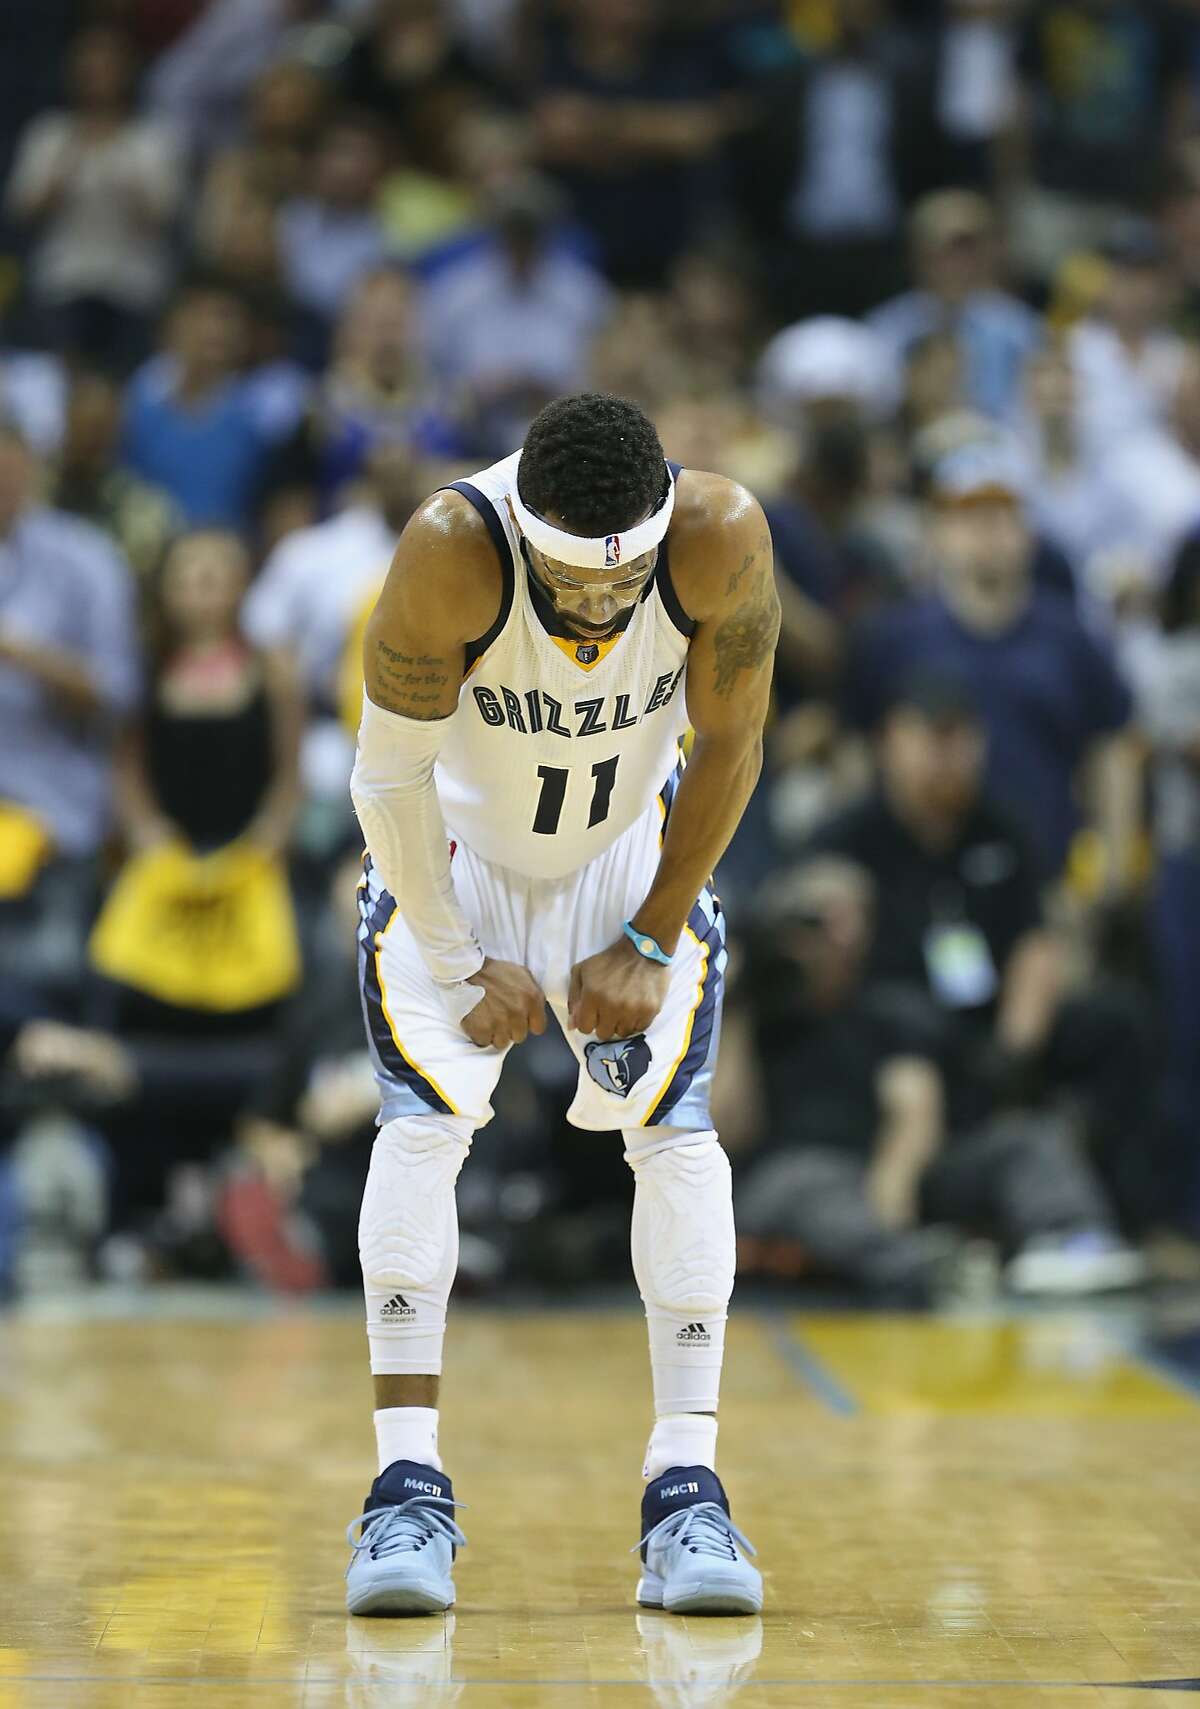 MEMPHIS, TN - MAY 15: Mike Conley #11 of the Memphis Grizzlies bends over in defeat in the final seconds of the game against the Golden State Warriors during Game six of the Western Conference Semifinals of the 2015 NBA Playoffs at FedExForum on May 15, 2015 in Memphis, Tennessee. NOTE TO USER: User expressly acknowledges and agrees that, by downloading and or using this photograph, User is consenting to the terms and conditions of the Getty Images License Agreement (Photo by Andy Lyons/Getty Images)